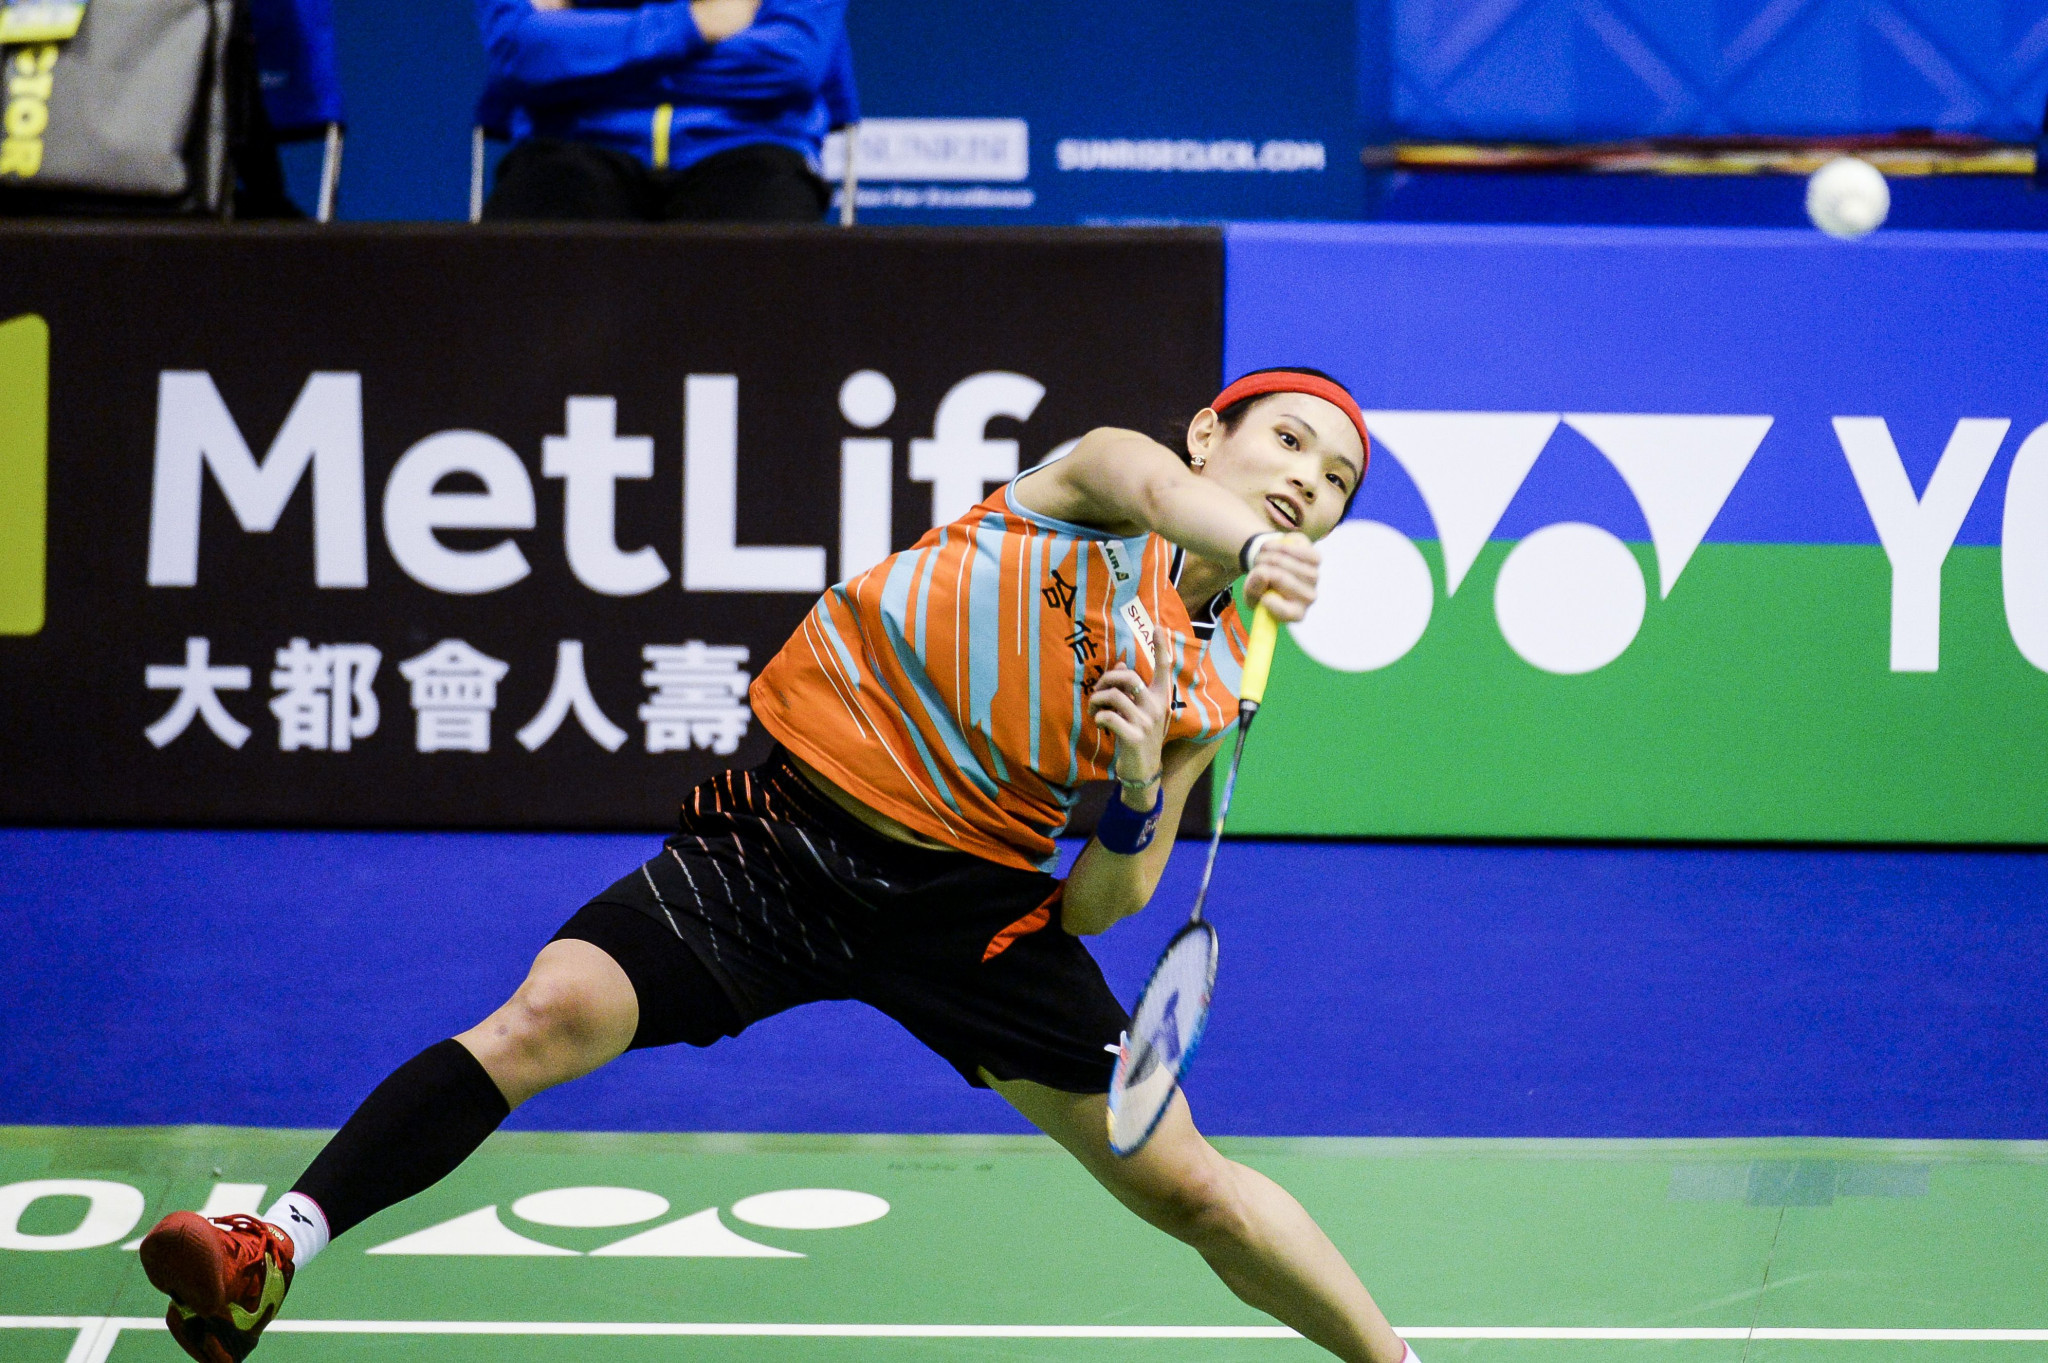 Few shocks in the singles on third day of BWF Hong Kong Open